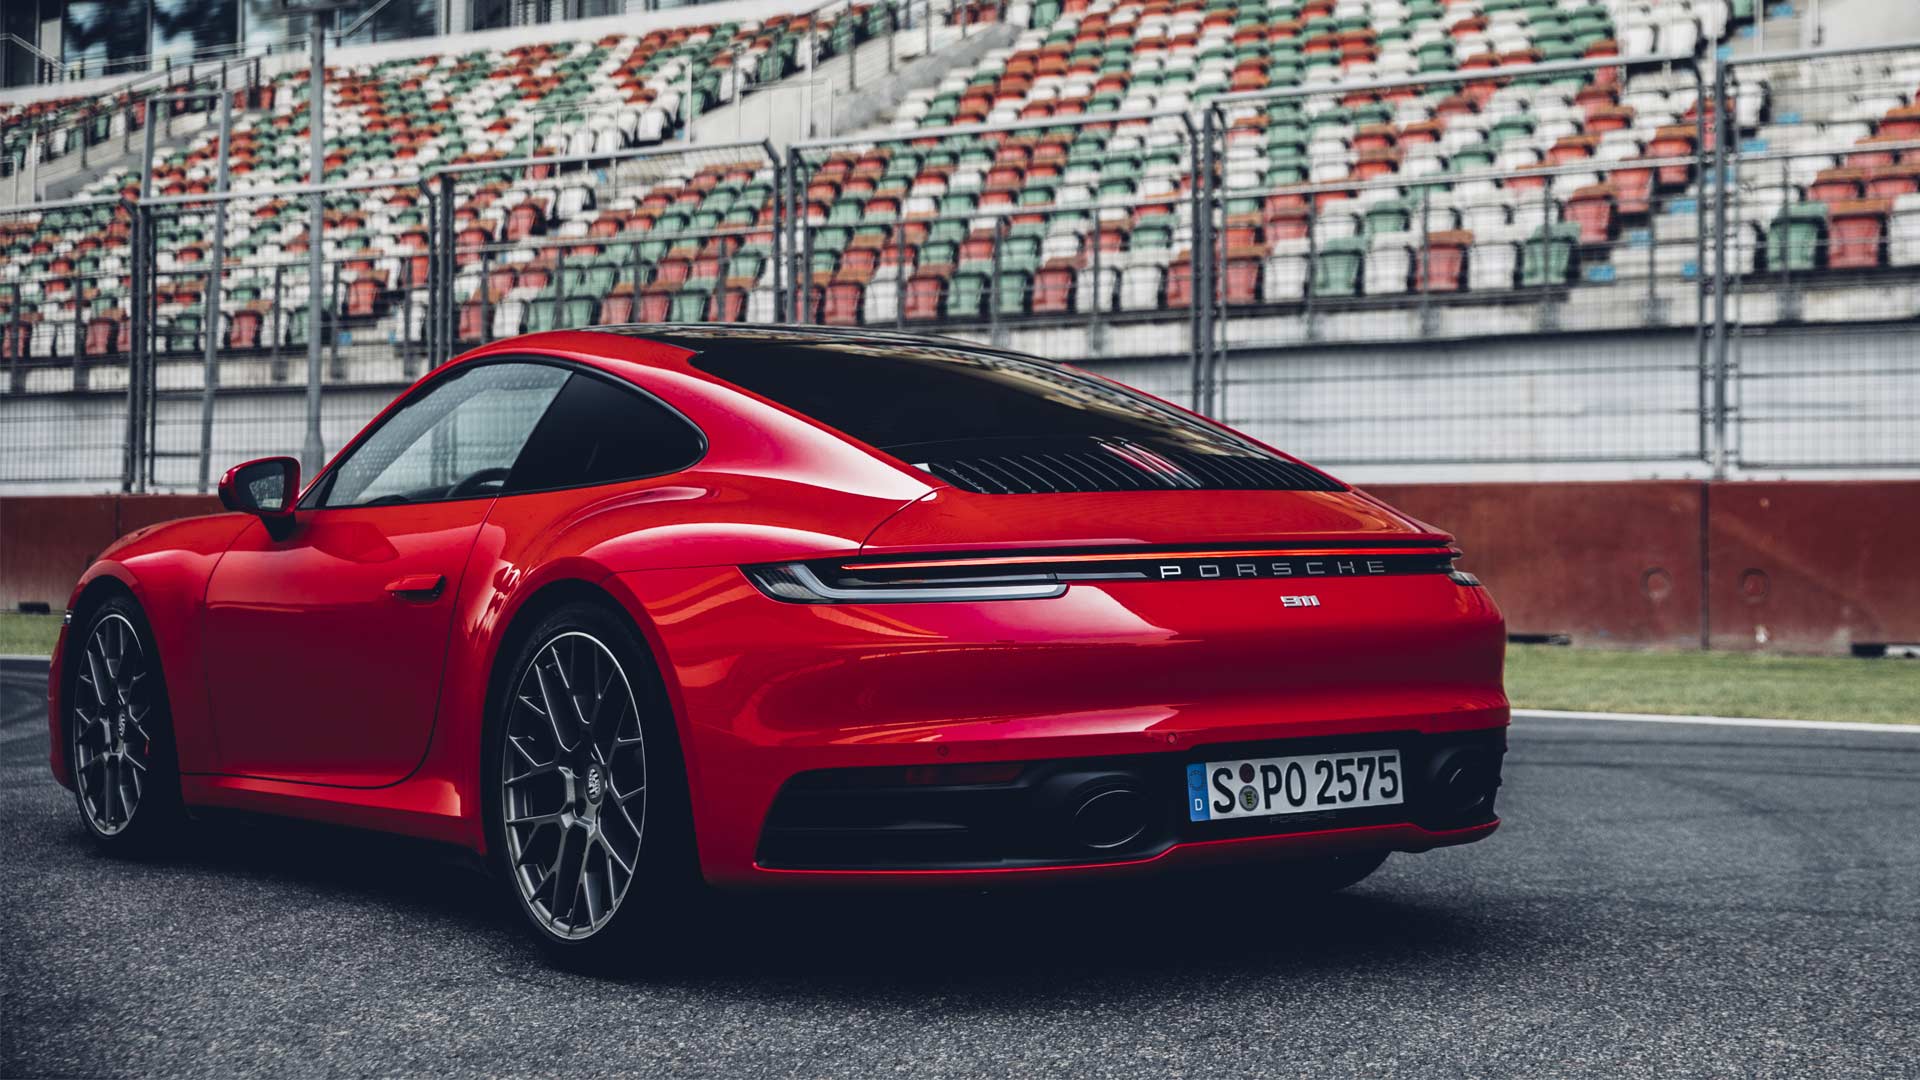 8th-generation-of-the-Porsche-911-India-launch-2019-Buddh-International-Circuit_4